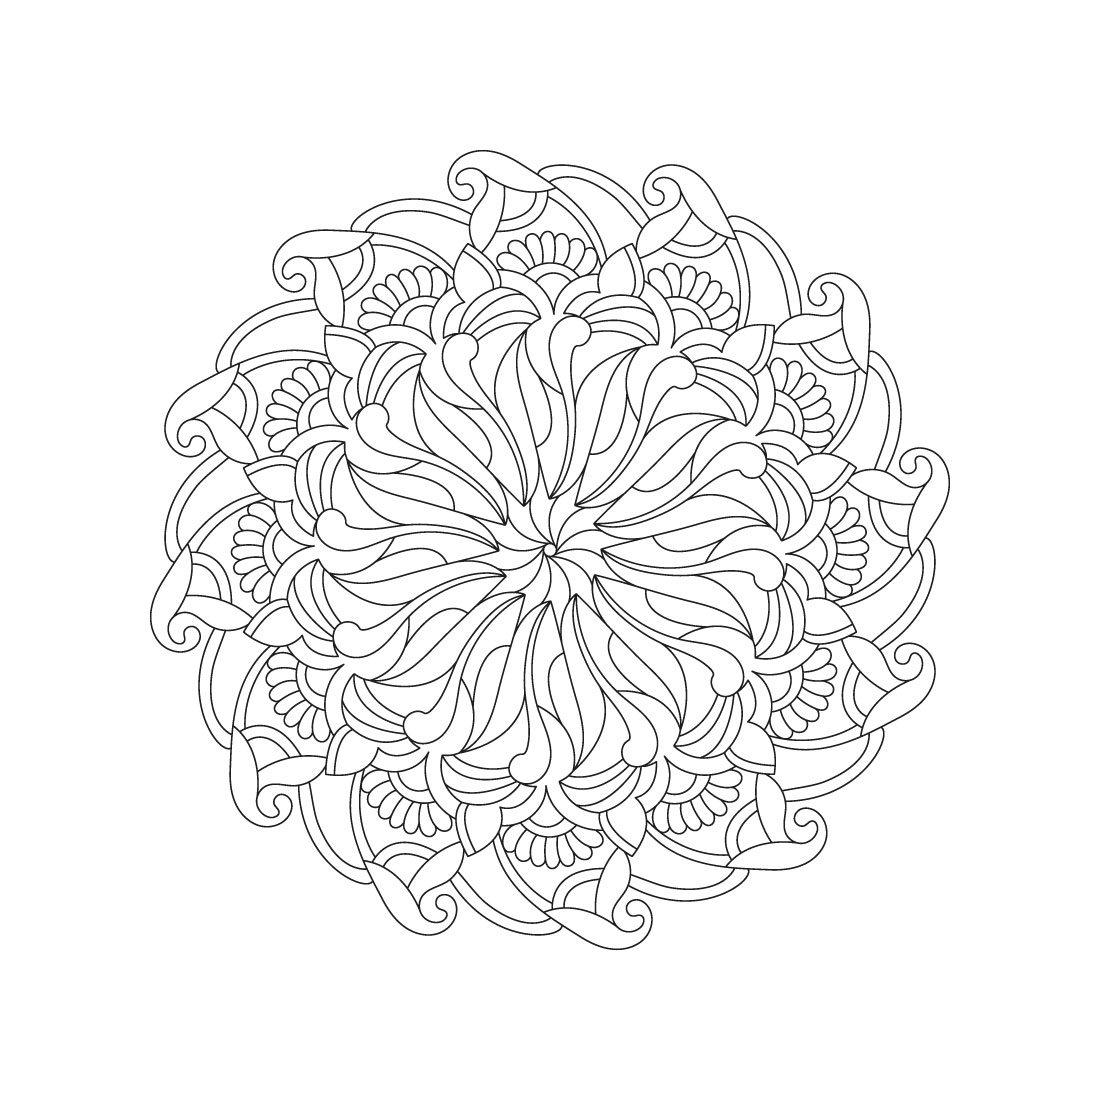 Bundle of 10 Enchanted Grace Mandala for KDP Coloring Book interior Pages preview image.